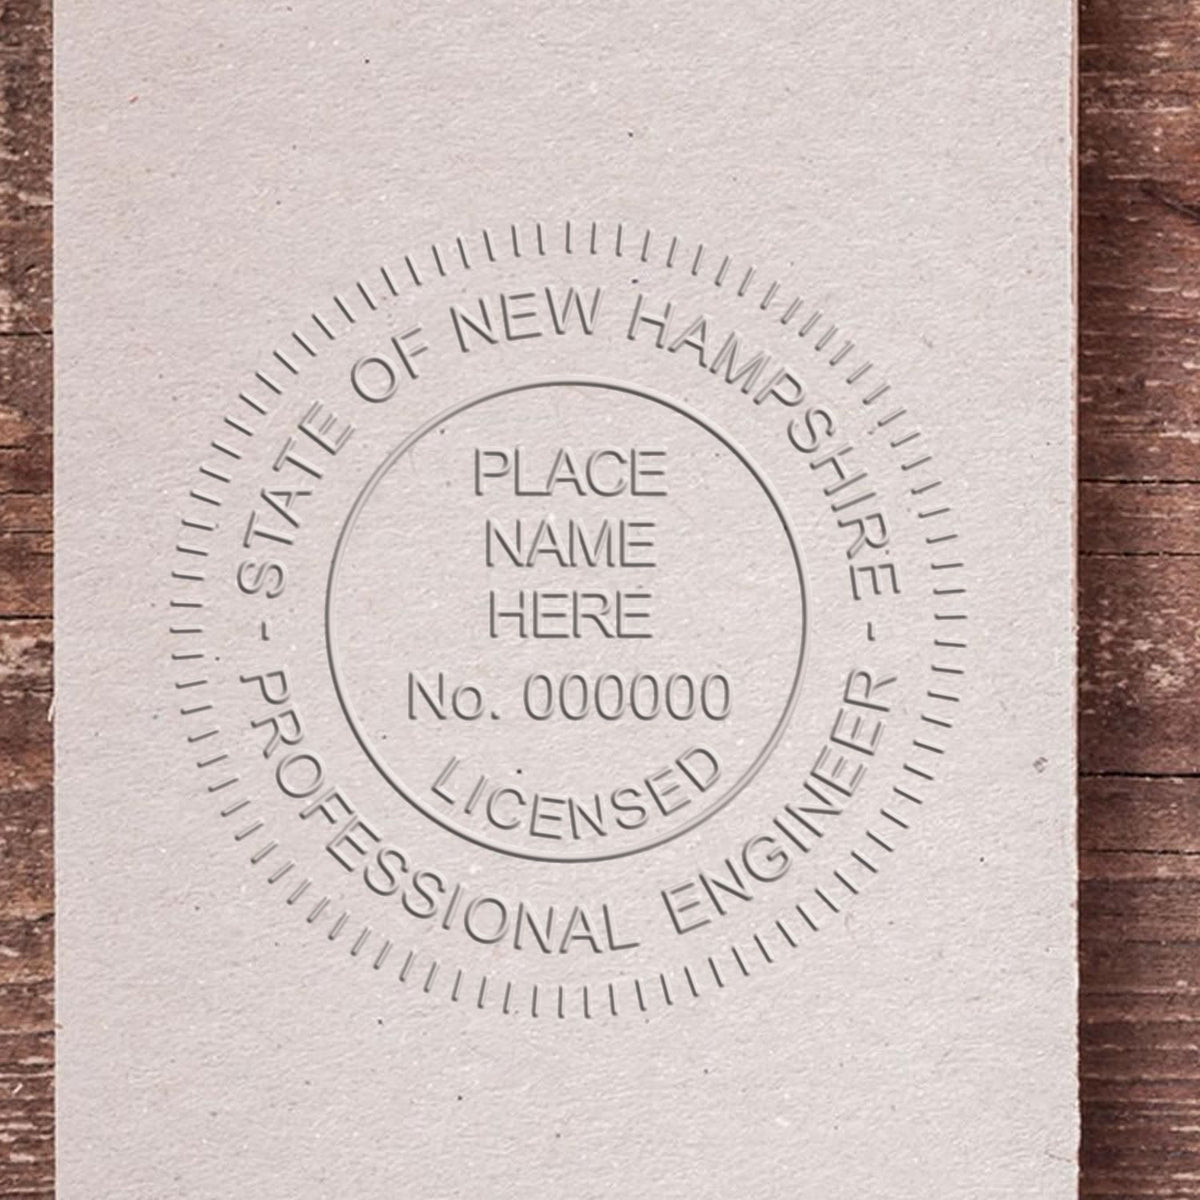 The State of New Hampshire Extended Long Reach Engineer Seal stamp impression comes to life with a crisp, detailed photo on paper - showcasing true professional quality.